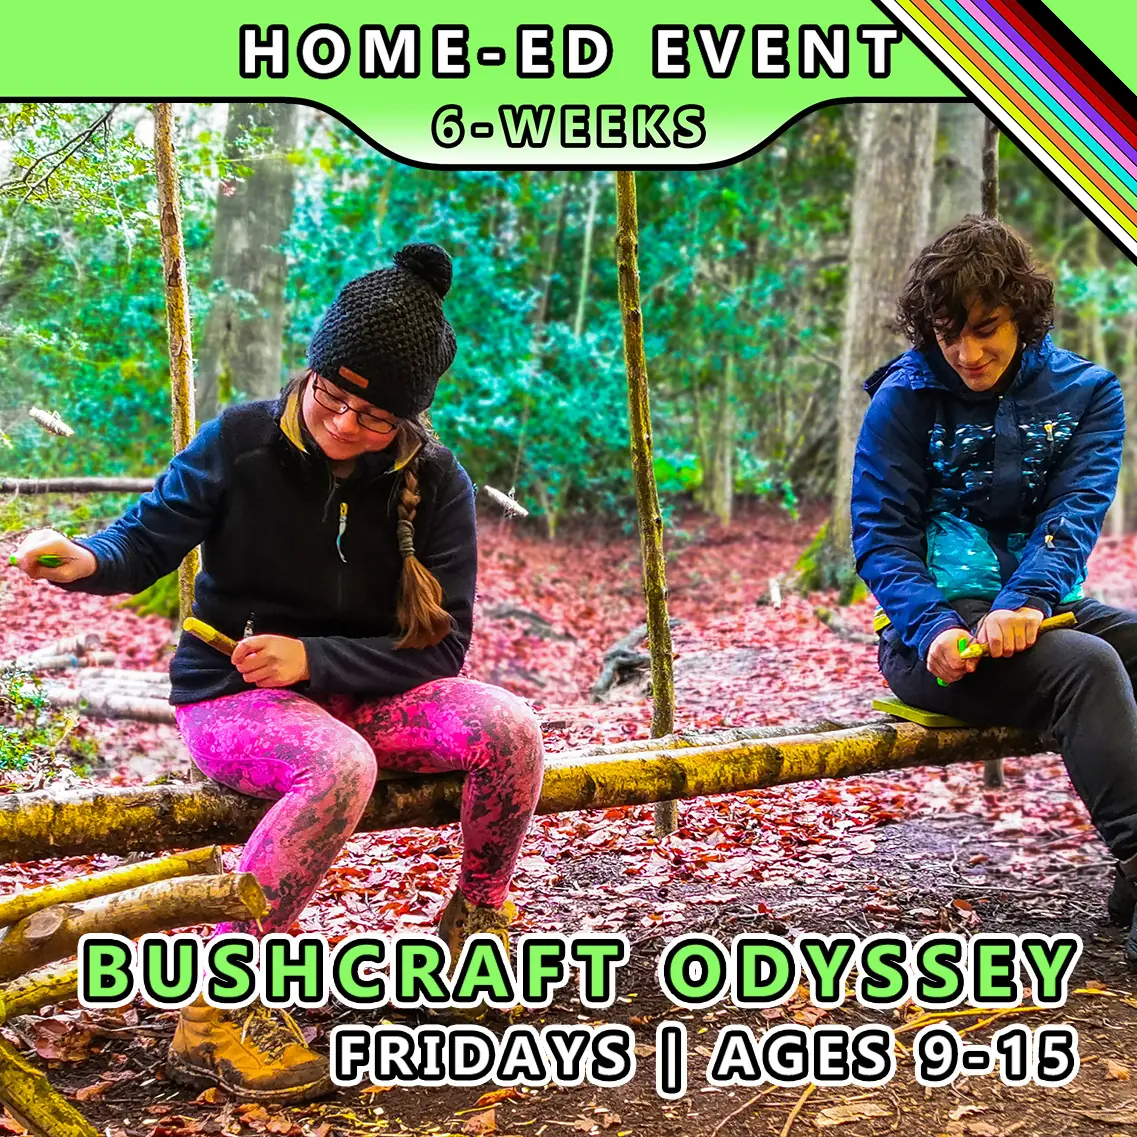 Bushcraft odyssey course for home-ed children at TRIBE with honours